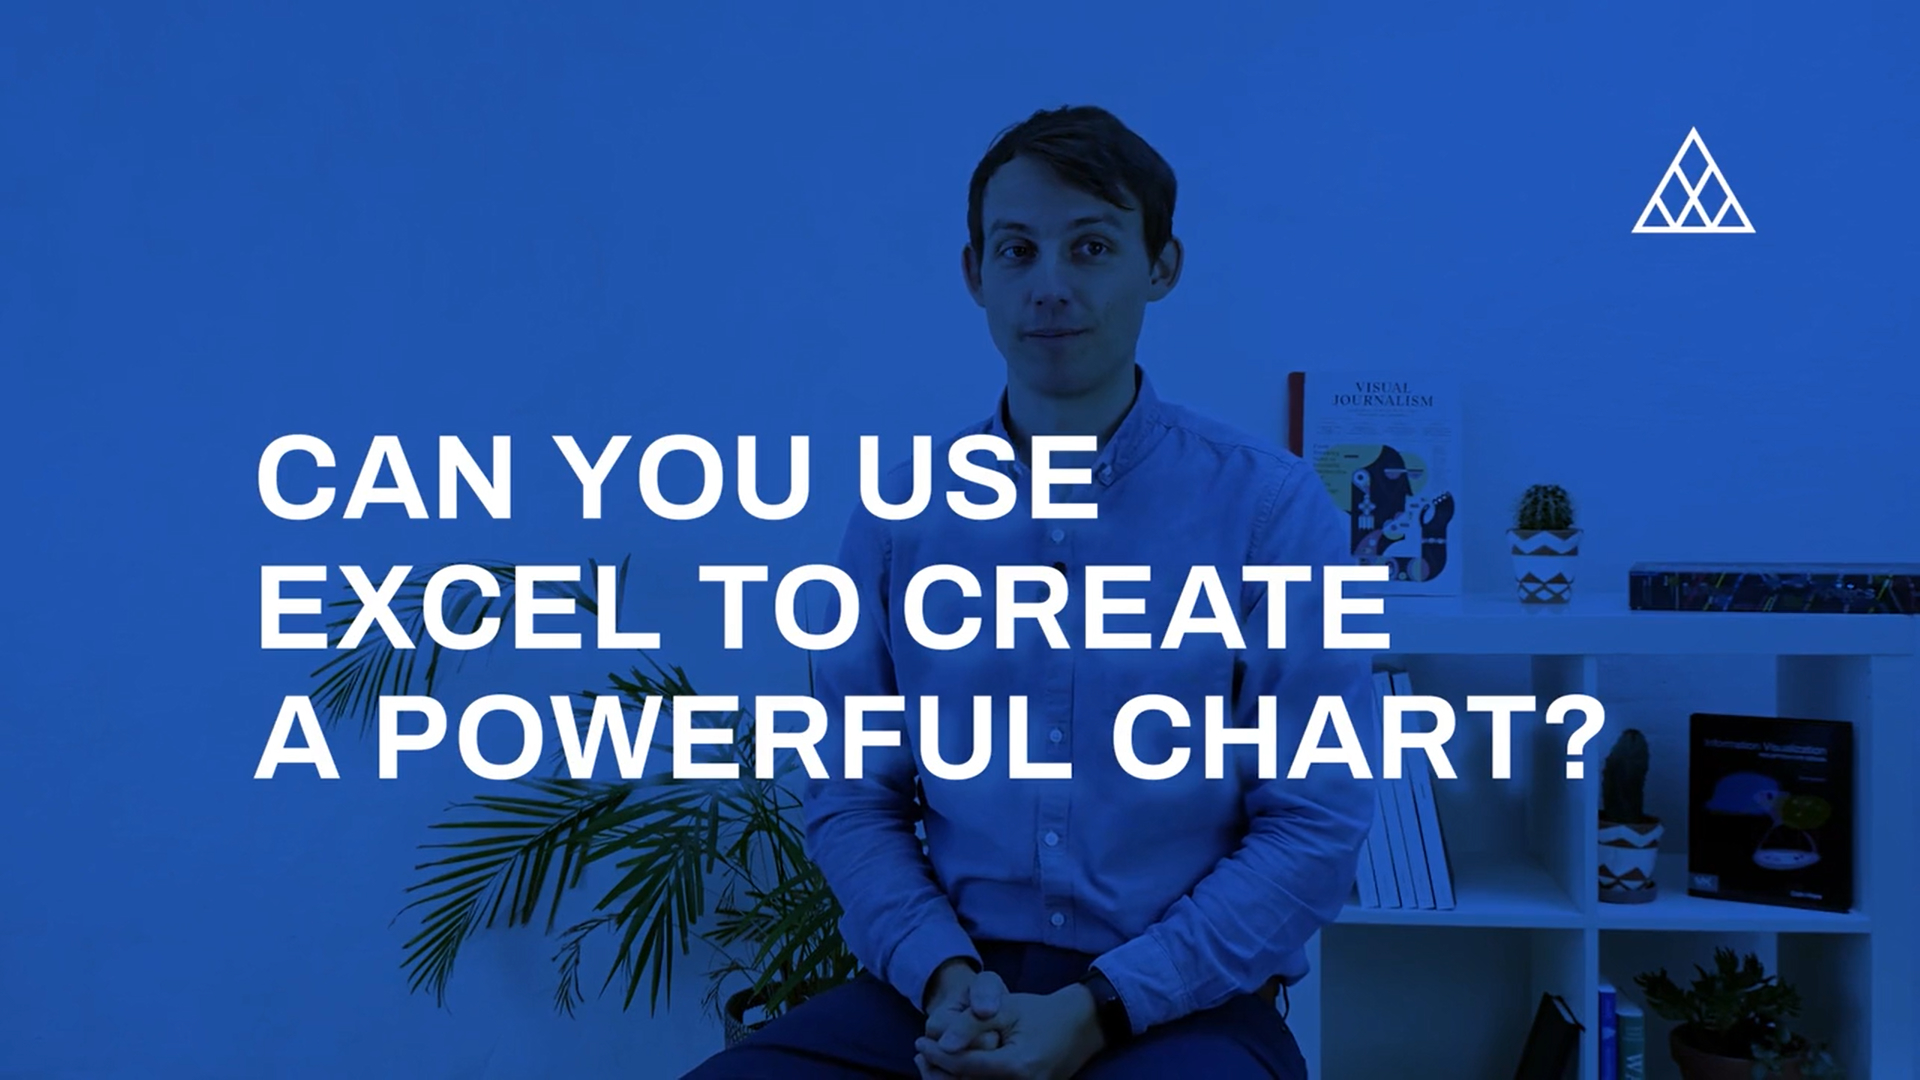 thumbnail for video 10 - can you use excel to create a powerful chart